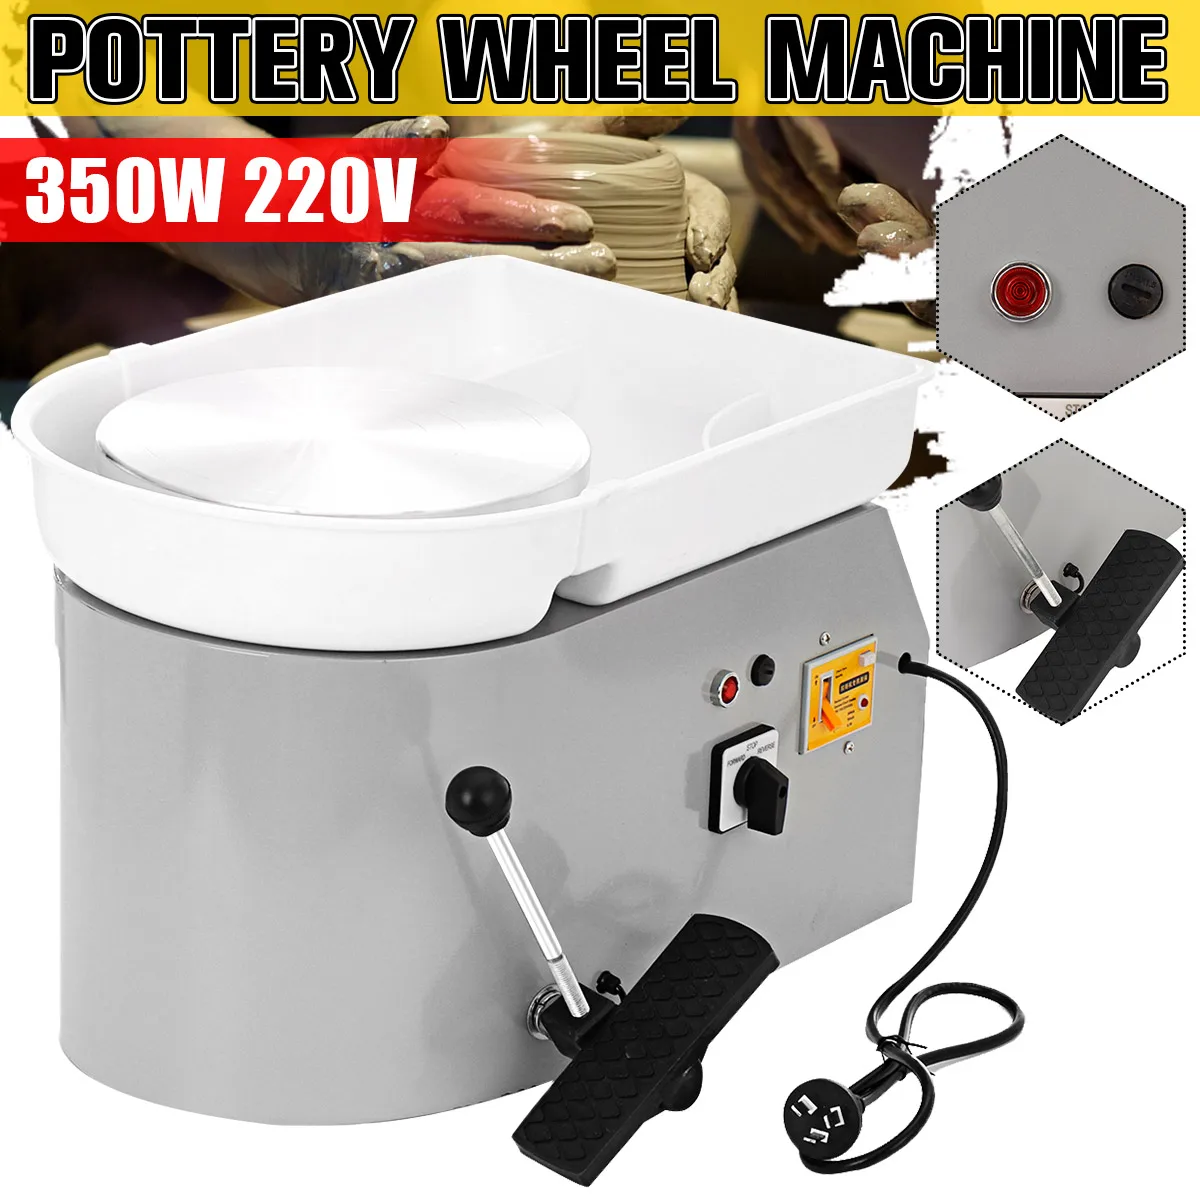 

350W 25cm Brushless Electric Pottery Wheel Machine Ceramic Shaping Tool Pottery Art Machine With Pedal For Student Amateur 220V